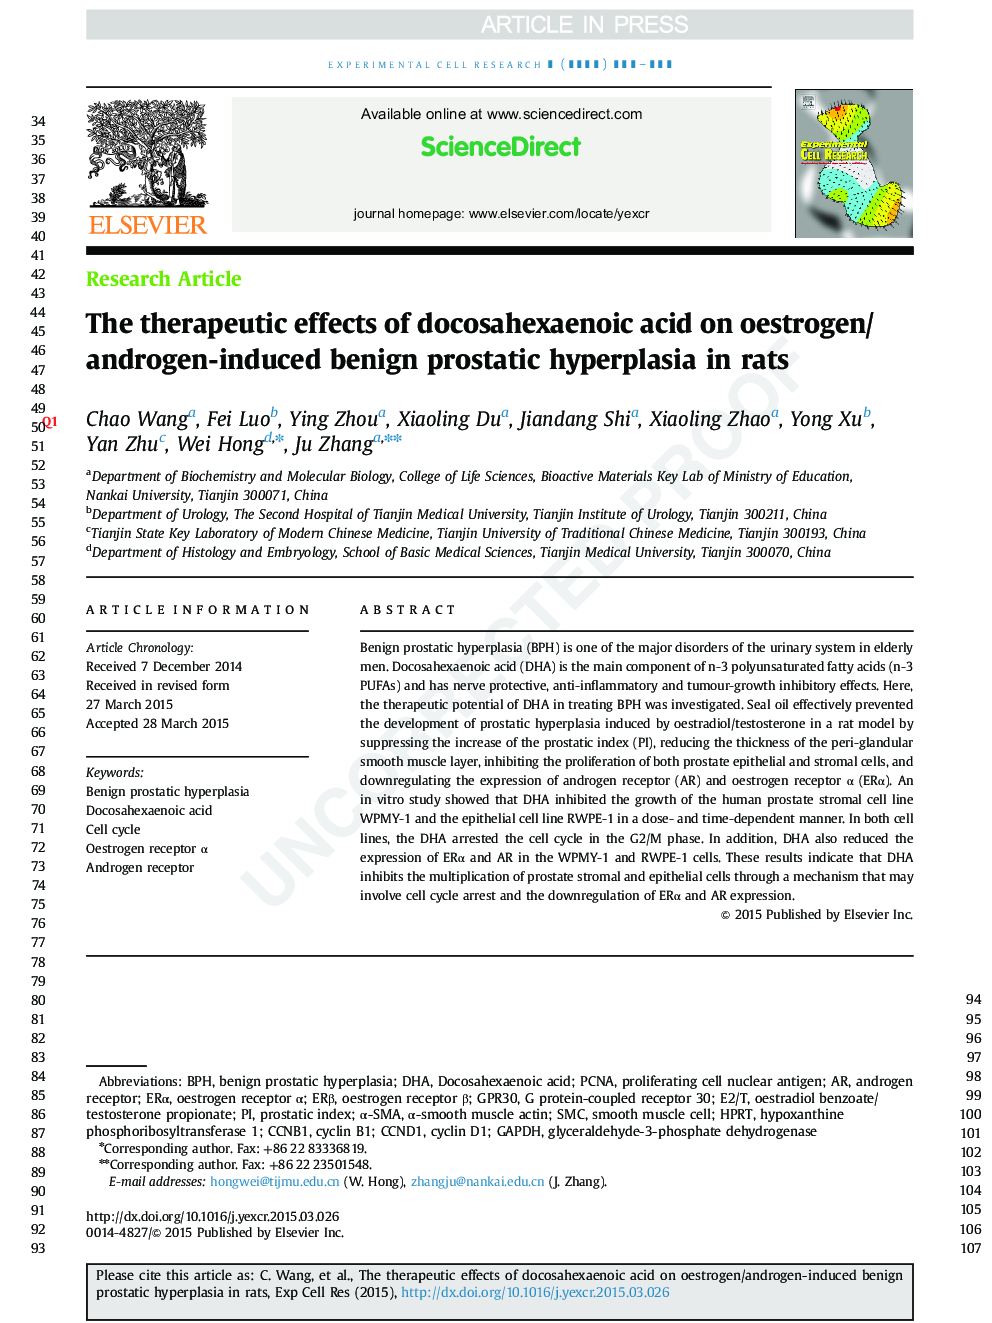 The therapeutic effects of docosahexaenoic acid on oestrogen/androgen-induced benign prostatic hyperplasia in rats